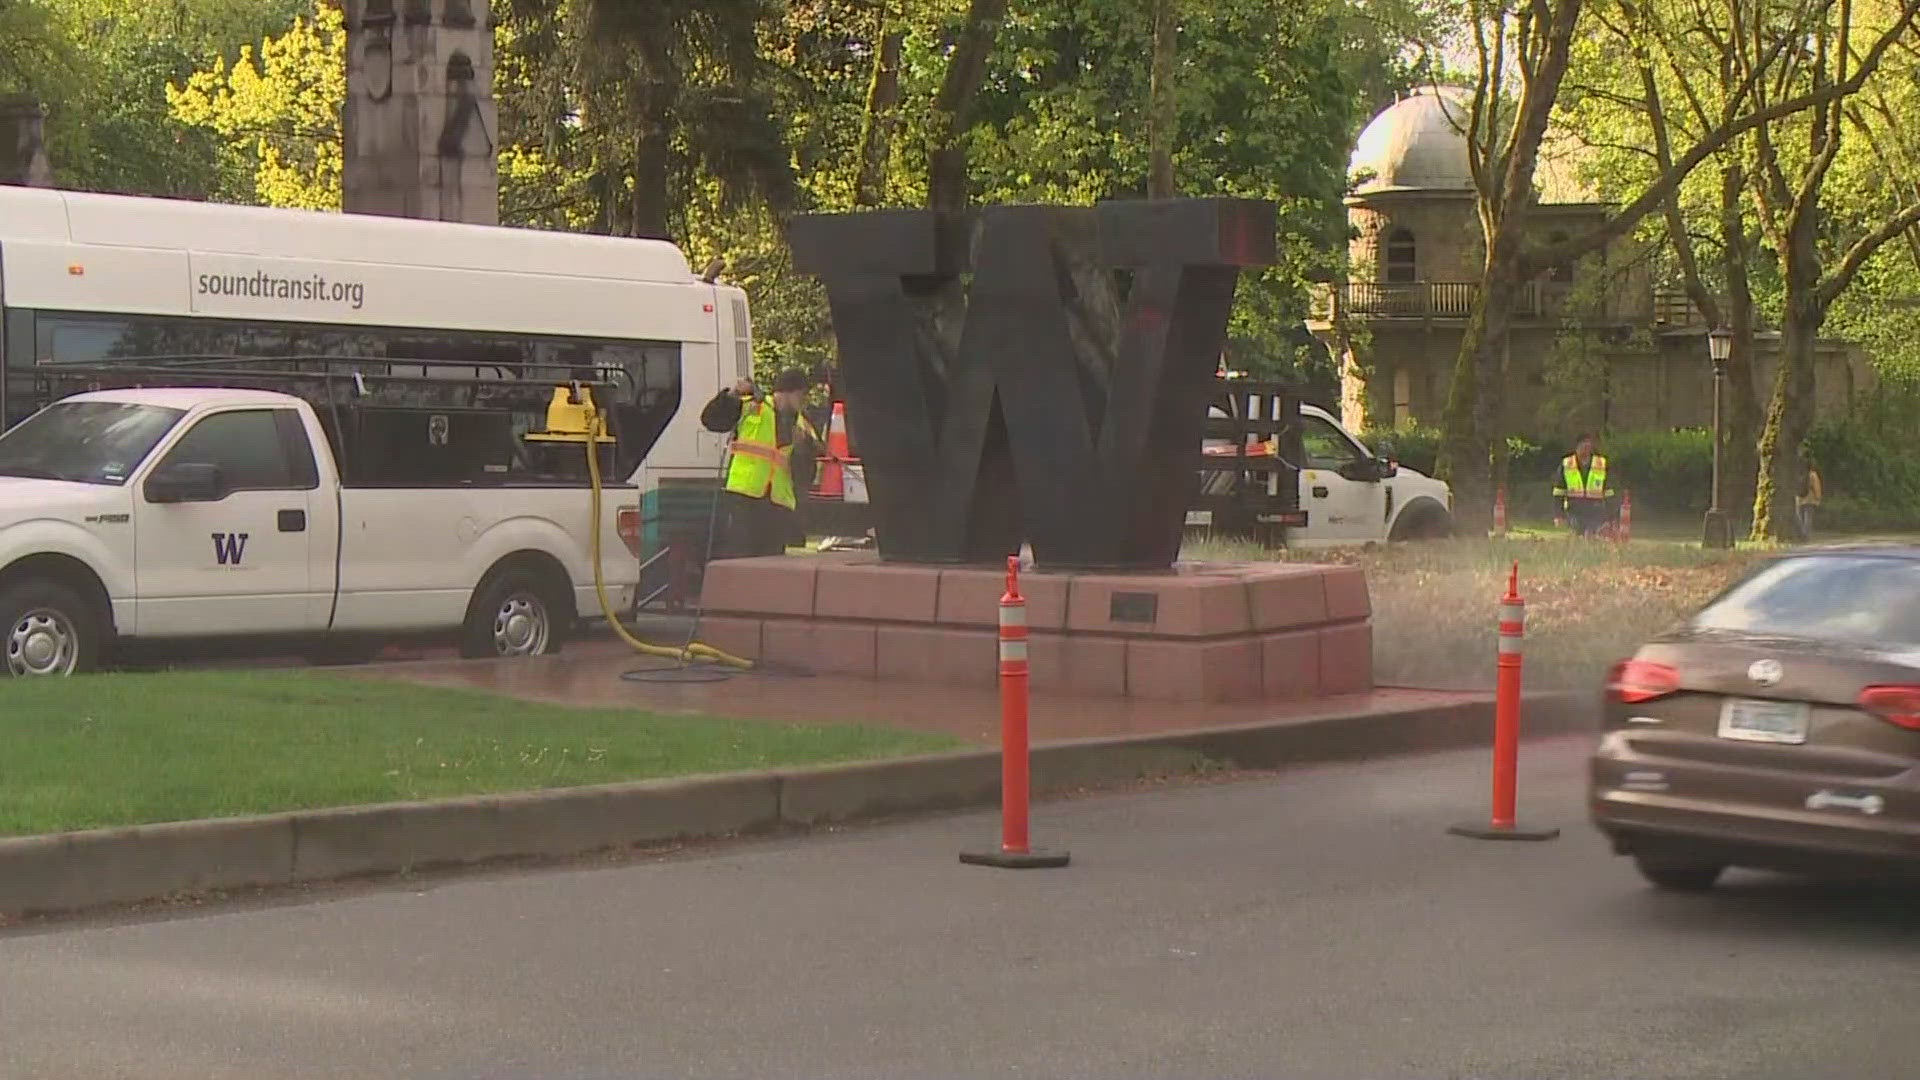 Crews had to pressure wash the W at the entrance of UW campus after vandals poured red paint on it